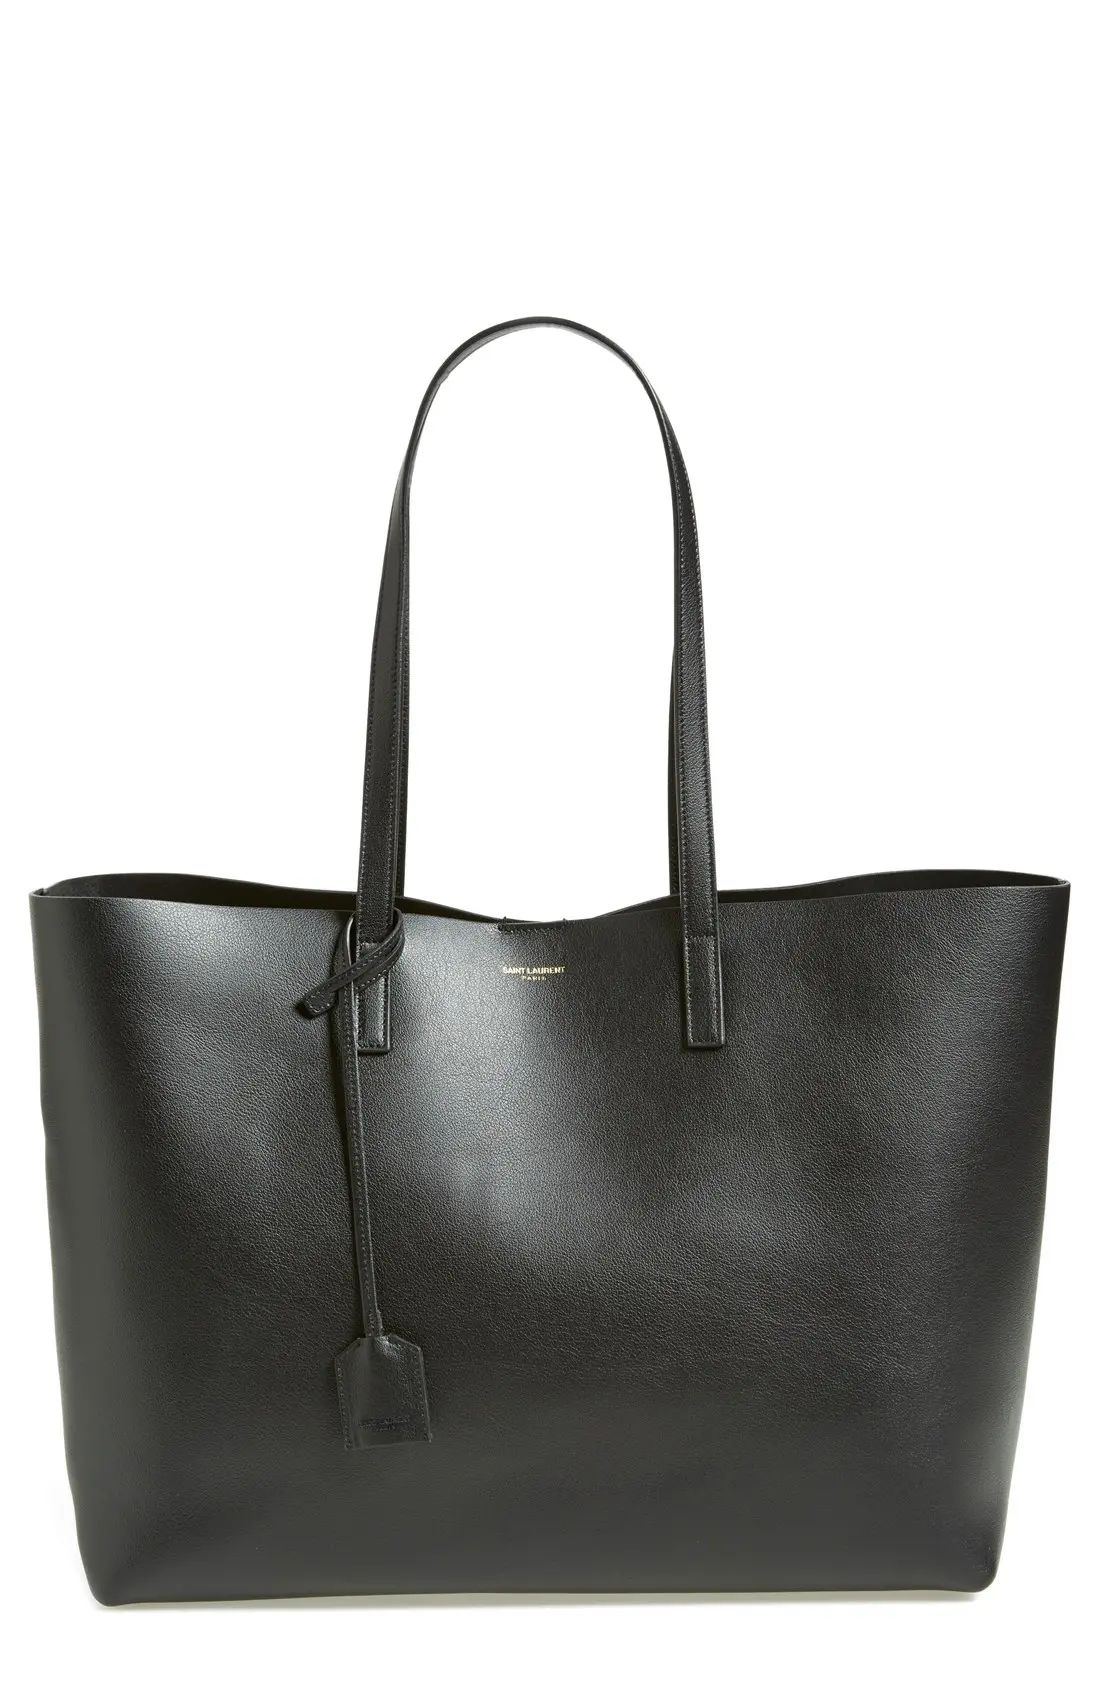 Saint Laurent 'Shopping' Leather Tote | Nordstrom